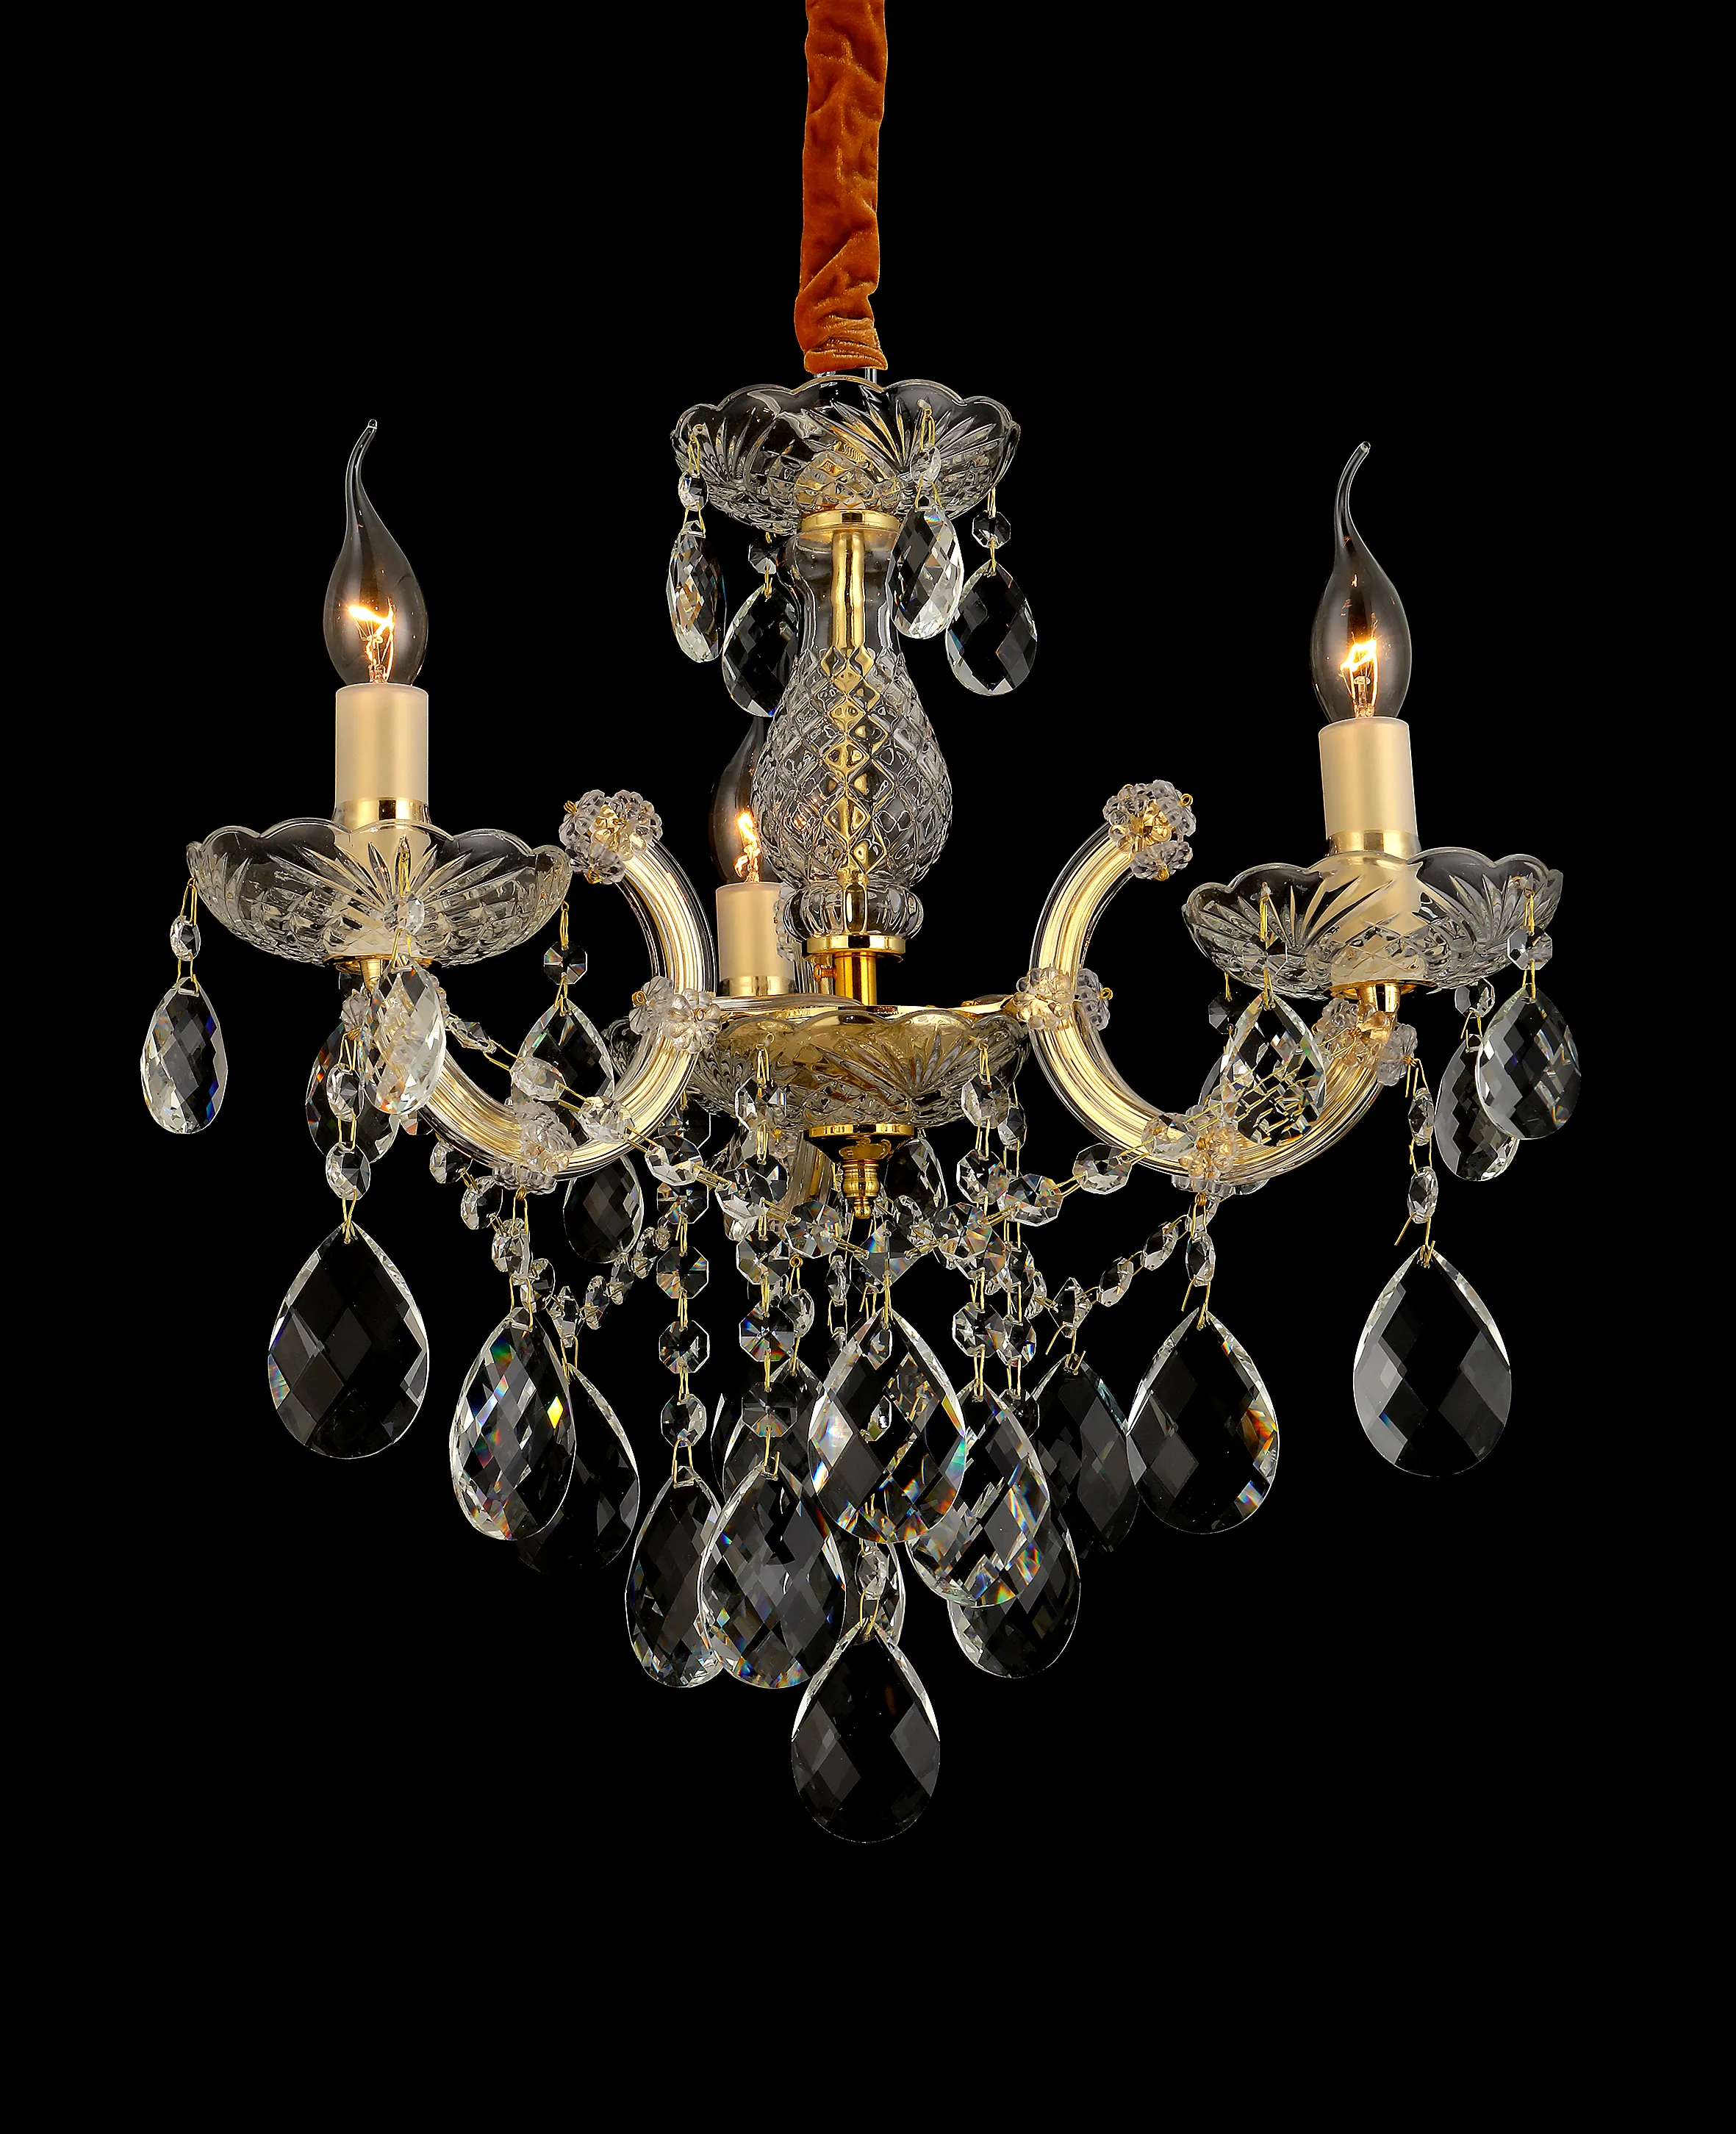 The best and cheapest luxury European style classic K9 crystal chandelier for wedding interior decoration chandelier